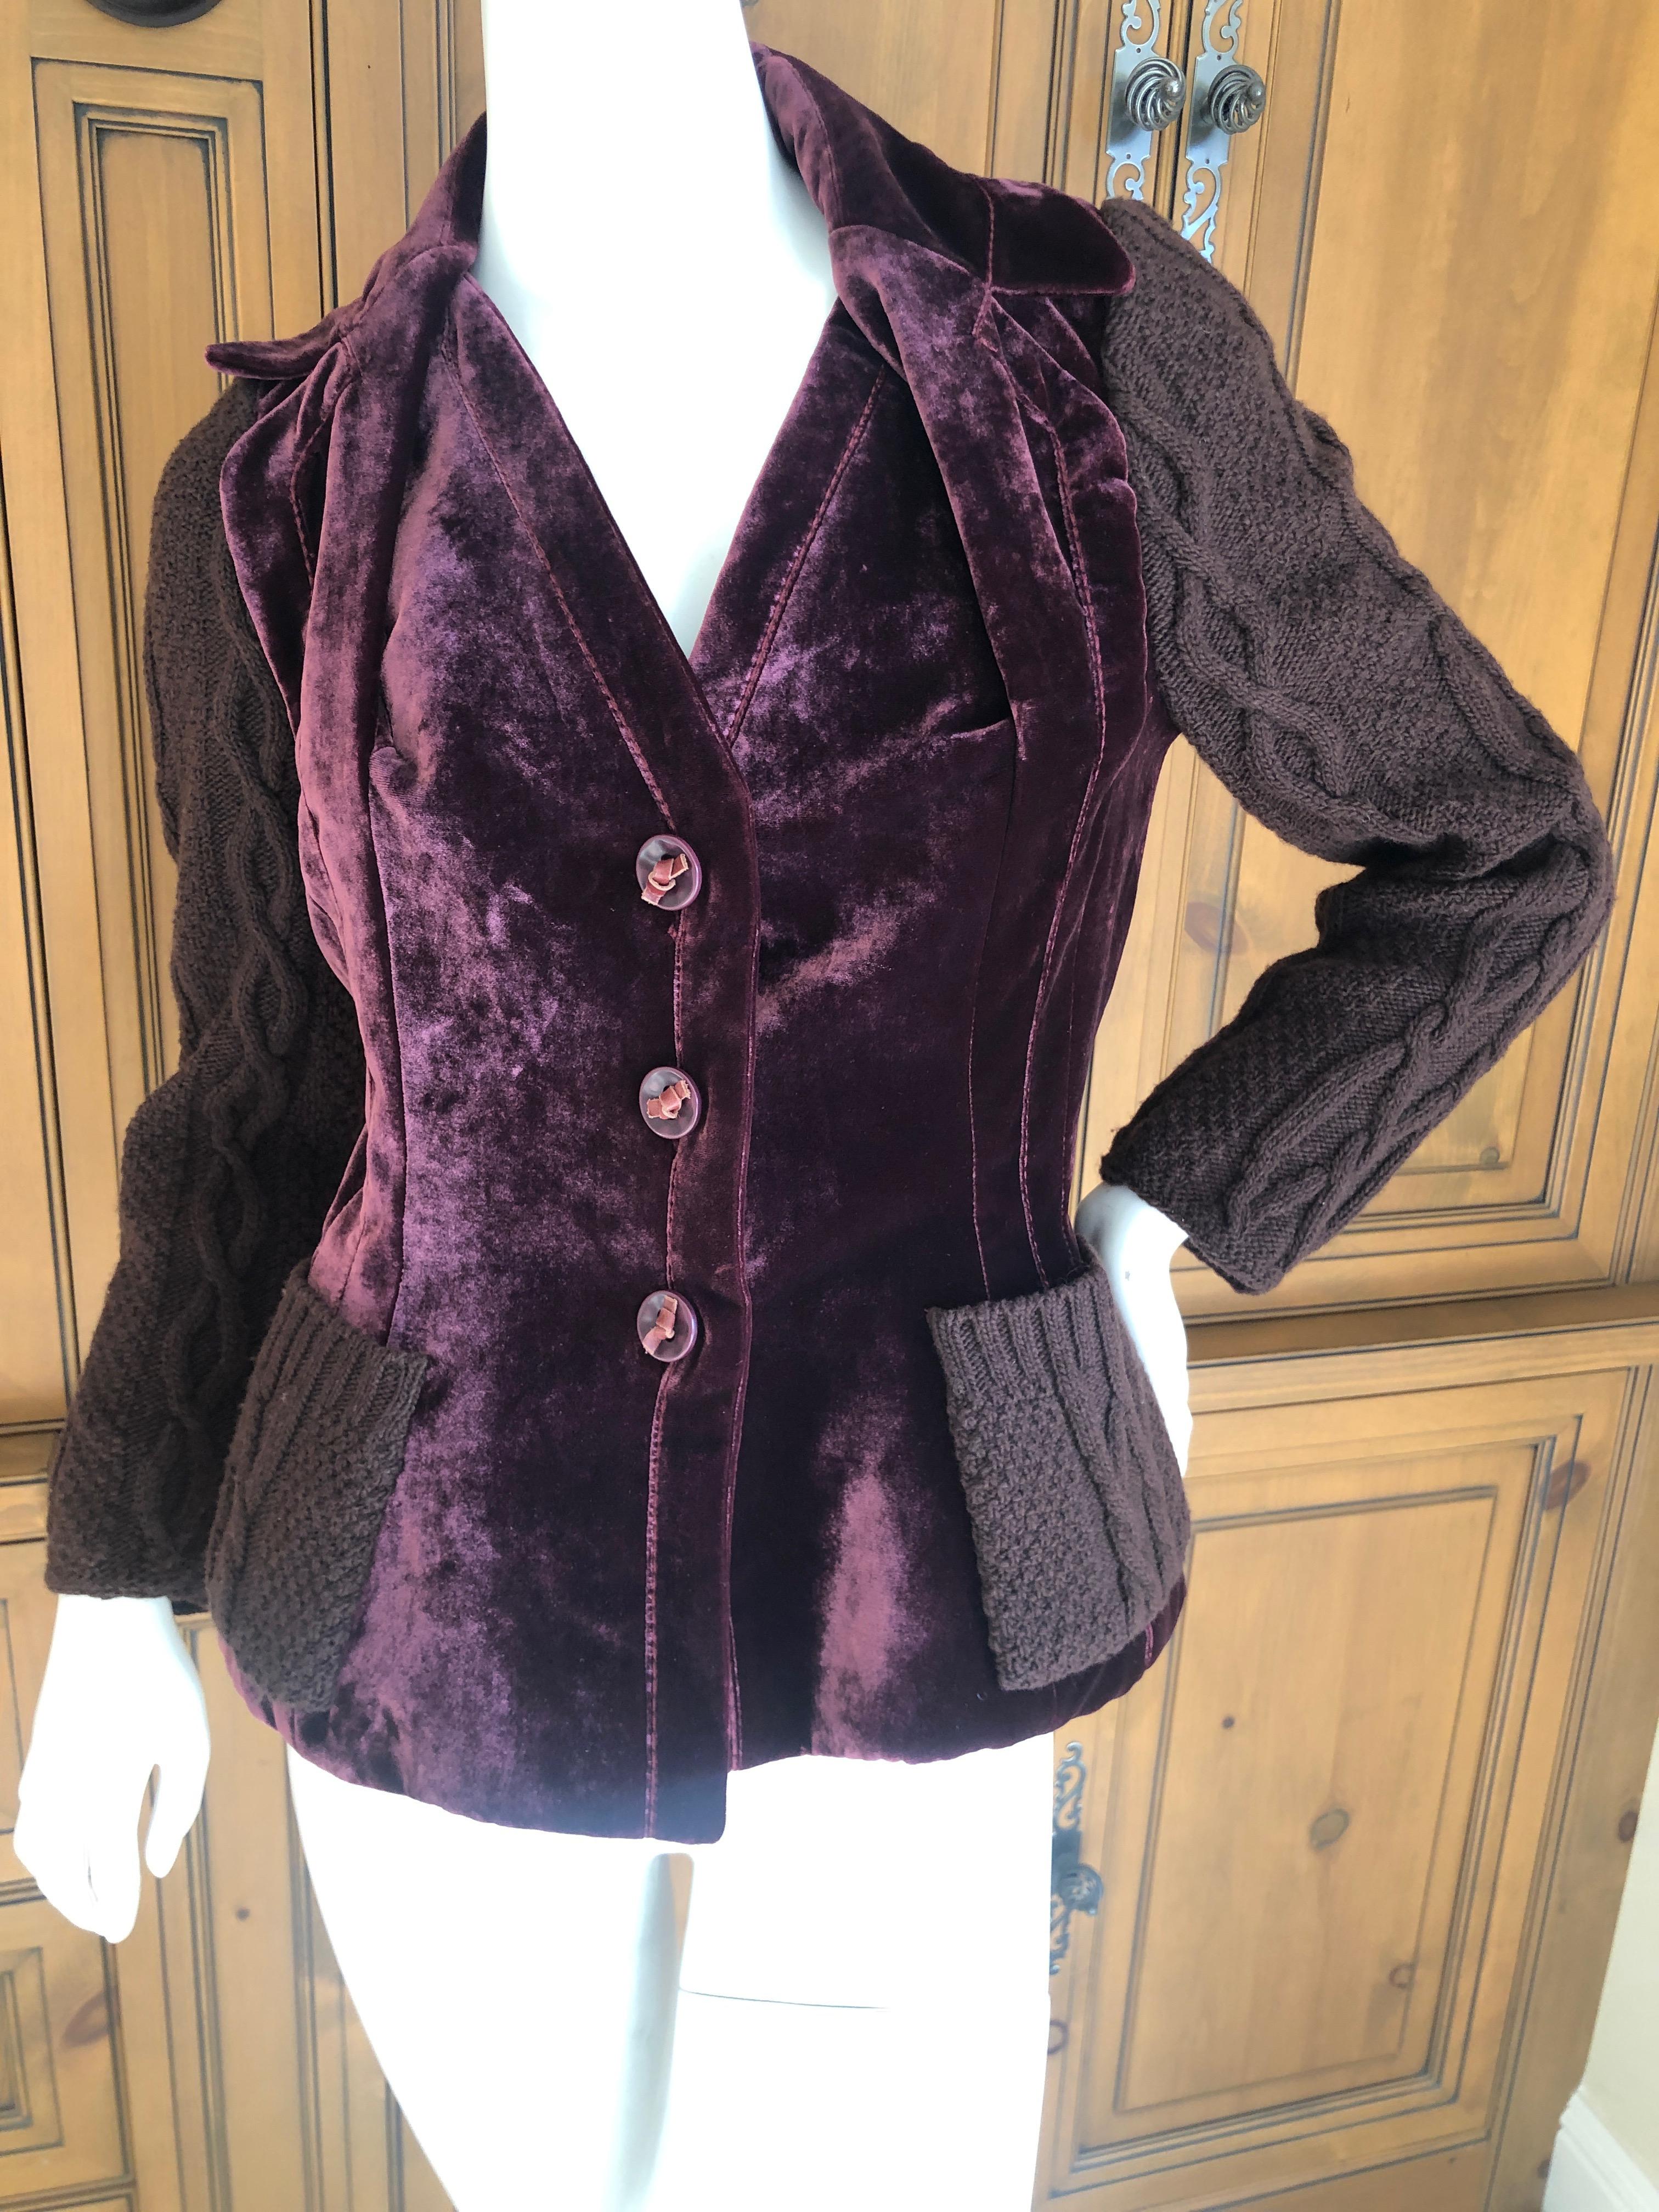 Christian Dior by John Galliano Burgundy Velvet Bar Jacket w Cable Knit Details In Excellent Condition For Sale In Cloverdale, CA